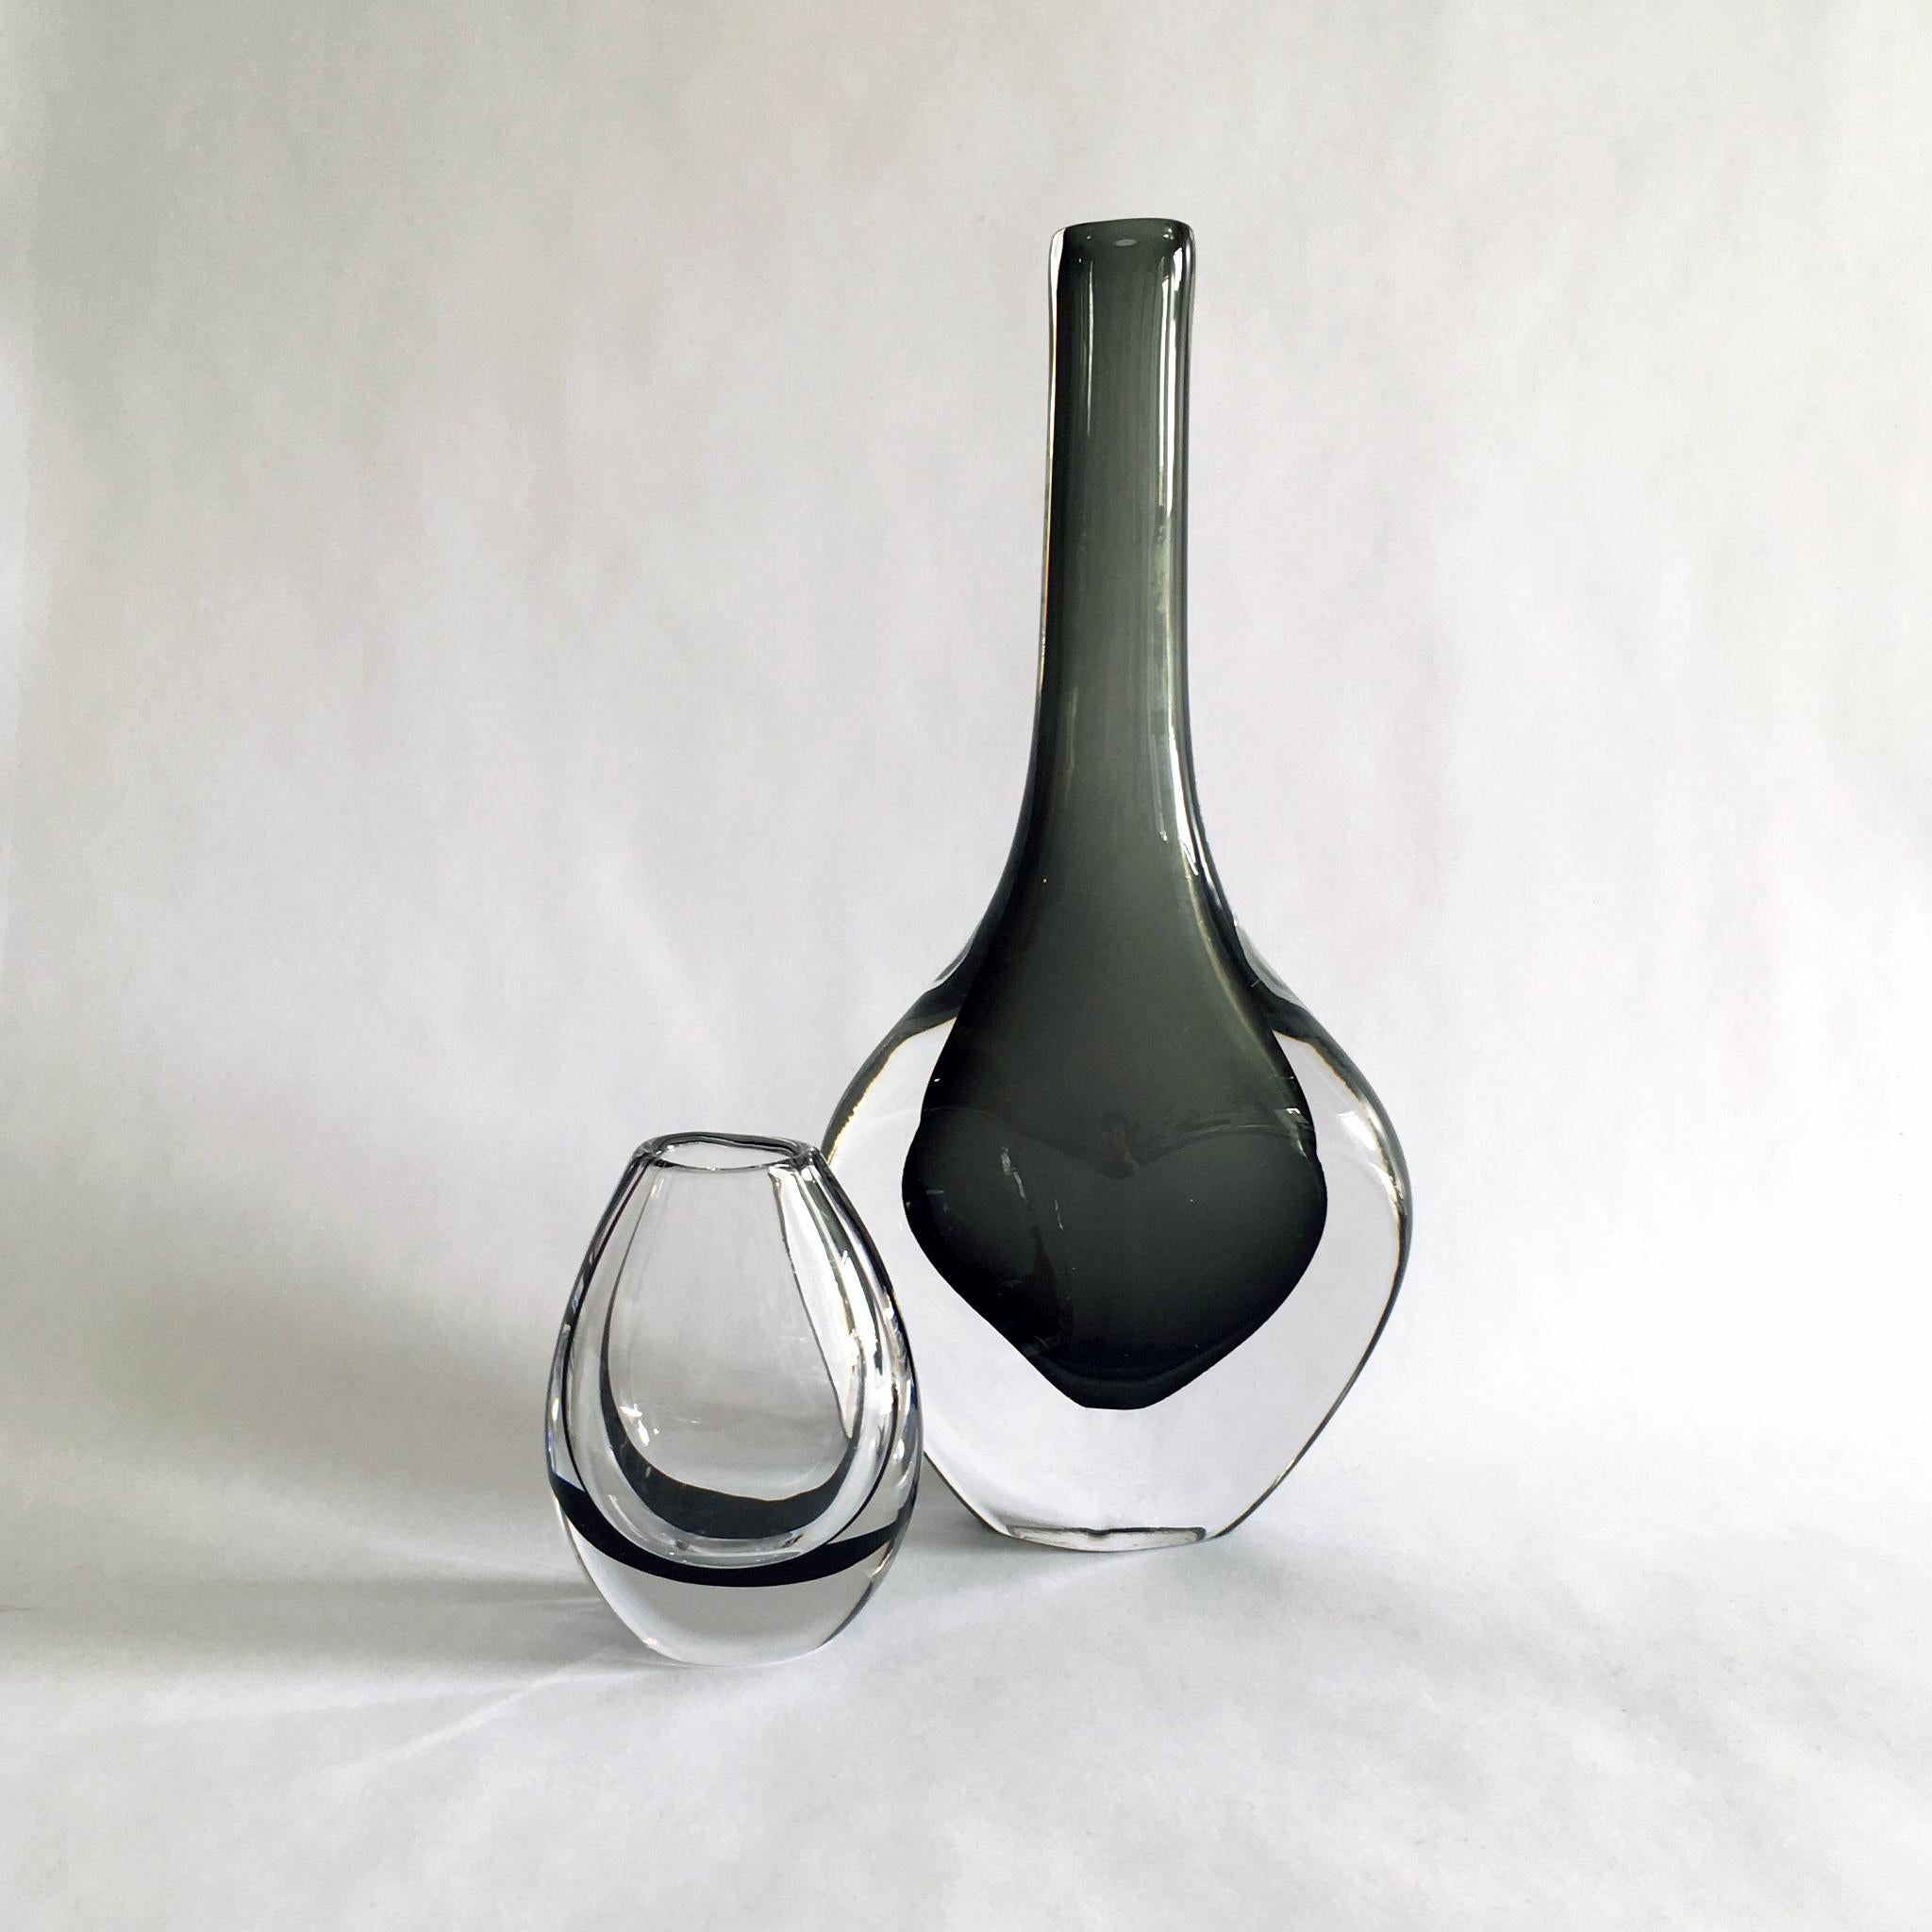 Pair of rare vase by Nils Landberg for Orrefors and Vicke Lindstrand for Kosta Sweden.

Nils Landberg for Orrefors blown glass in the sommerso technique showing 'dusk', an olive grey color, layered with clear glass. Circa 1950s,